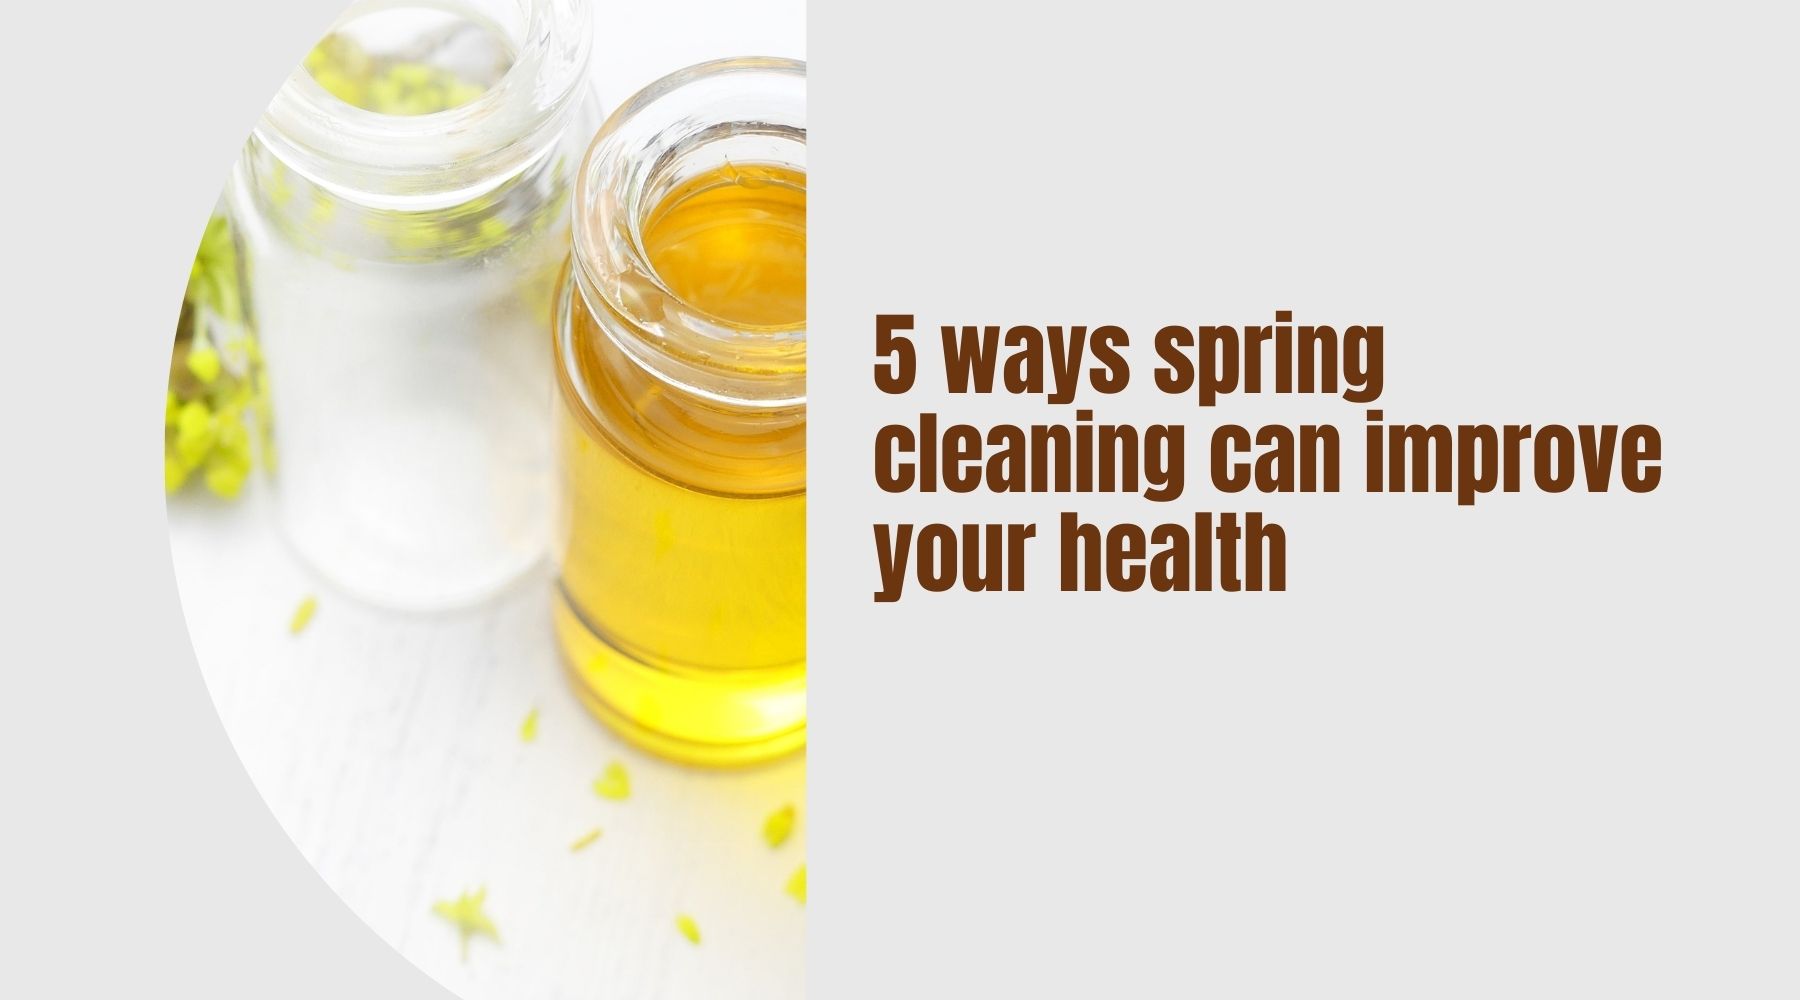 5 Ways Spring Cleaning can improve your health